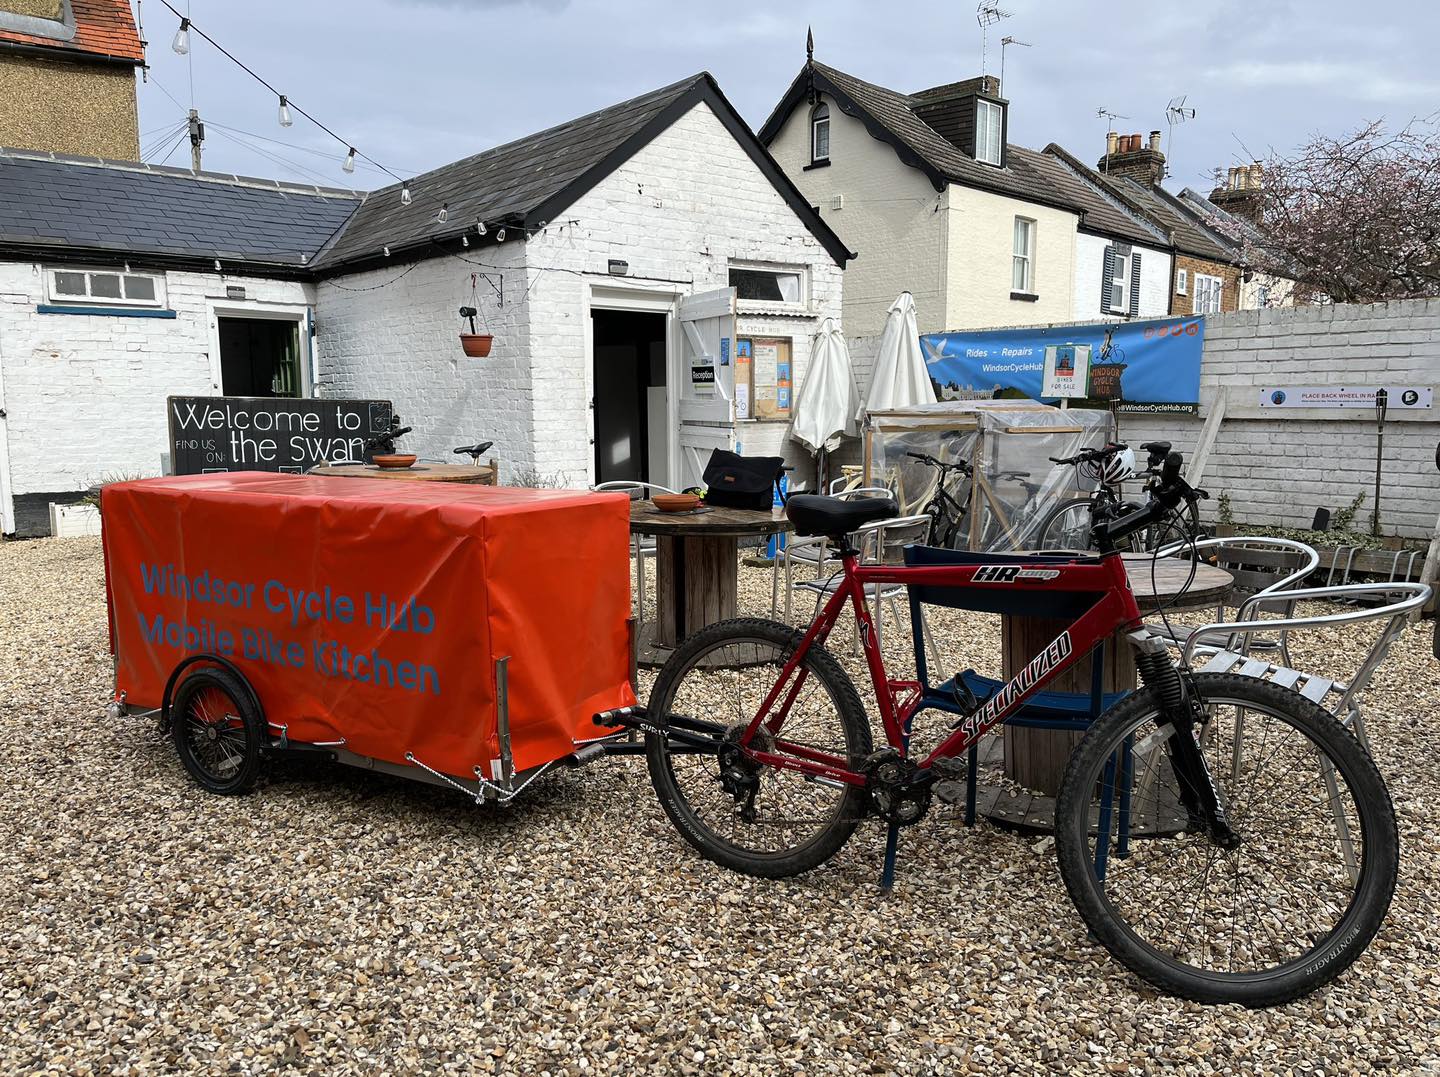 The new mobile bike kitchen, a bright red trailer full of equipment, attached to a bike, of course.